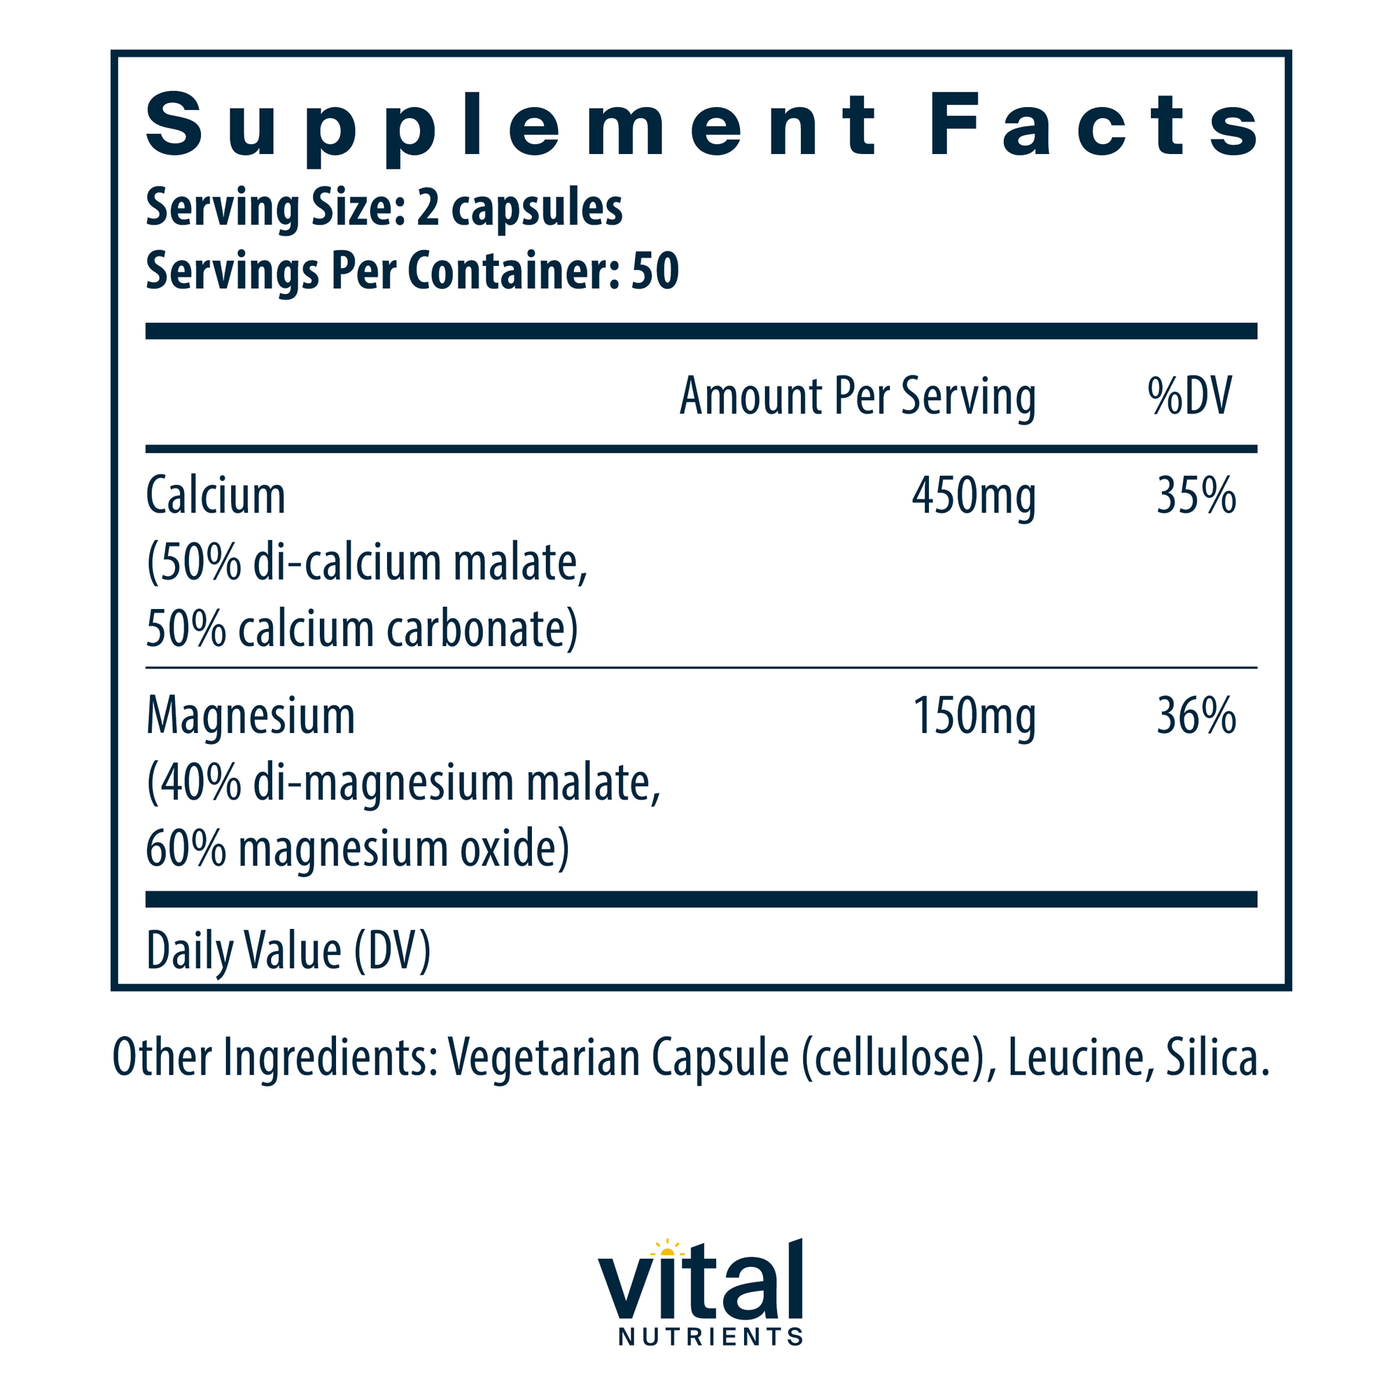 Calcium & Magnesium 225mg/75mg 100 vcaps Curated Wellness